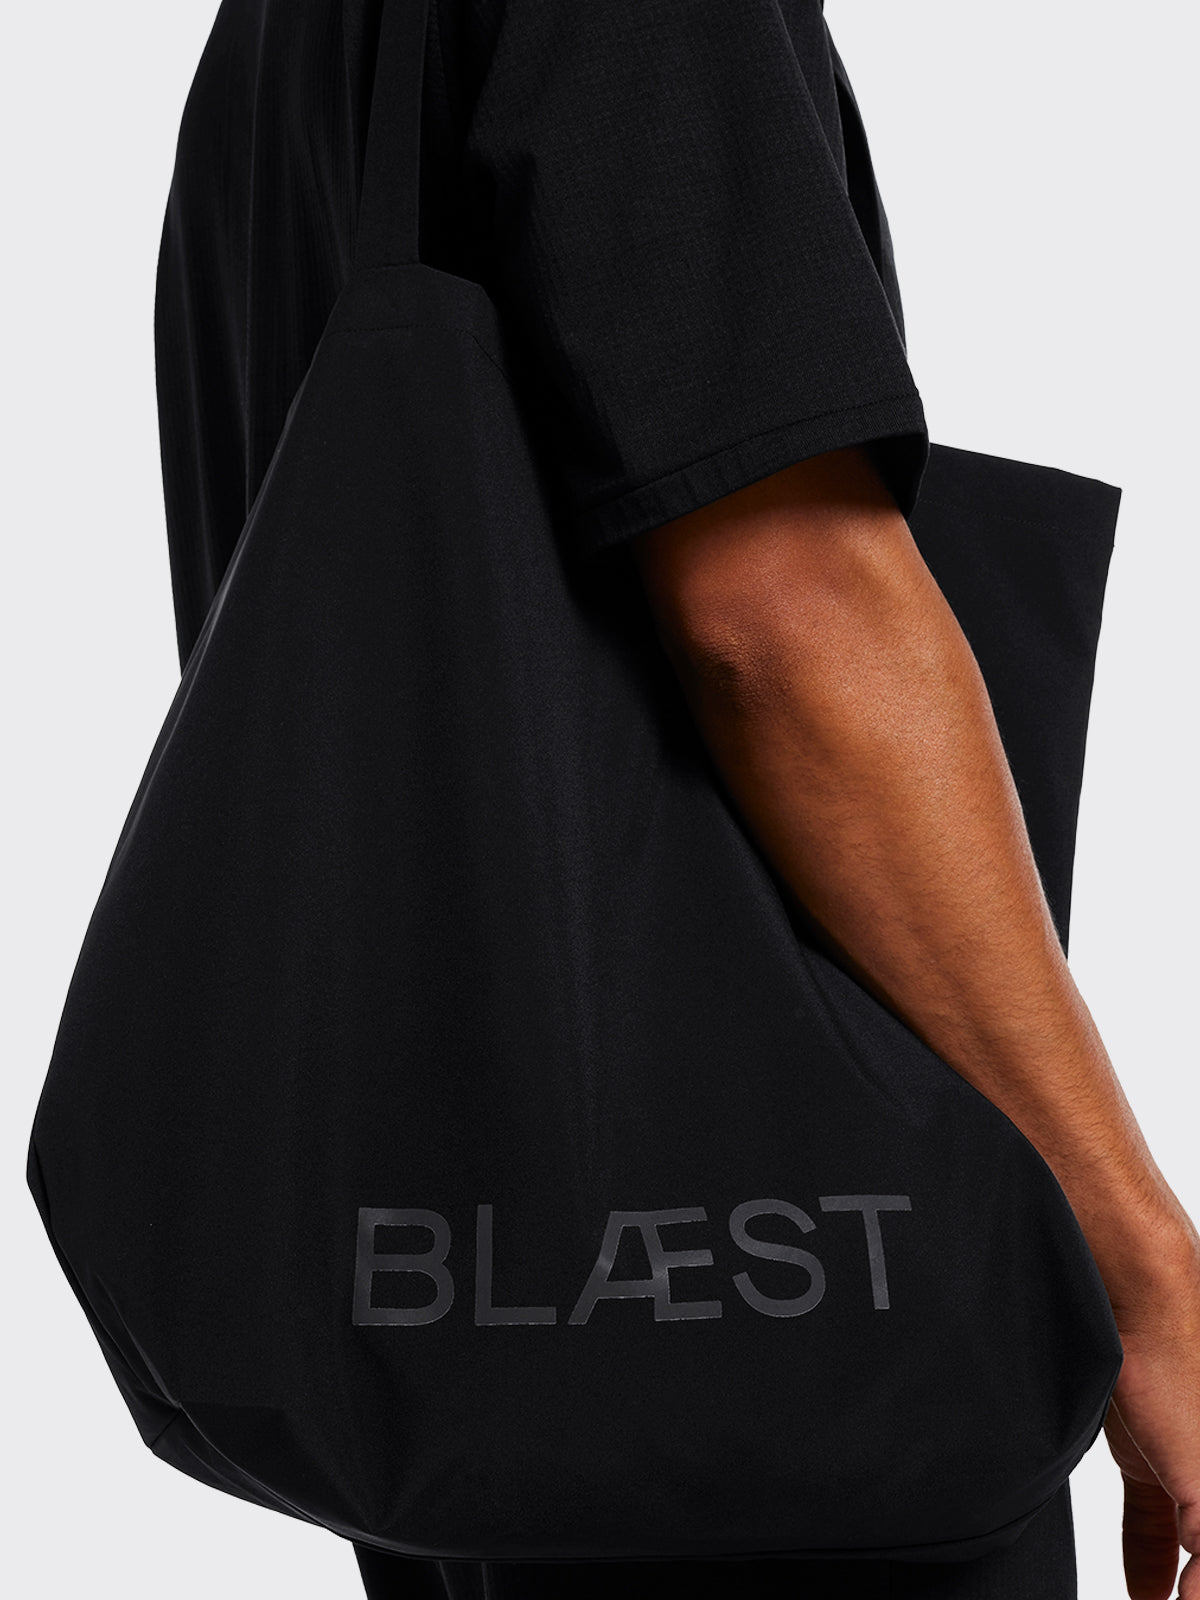 Moa tote bag from Blæst in Black